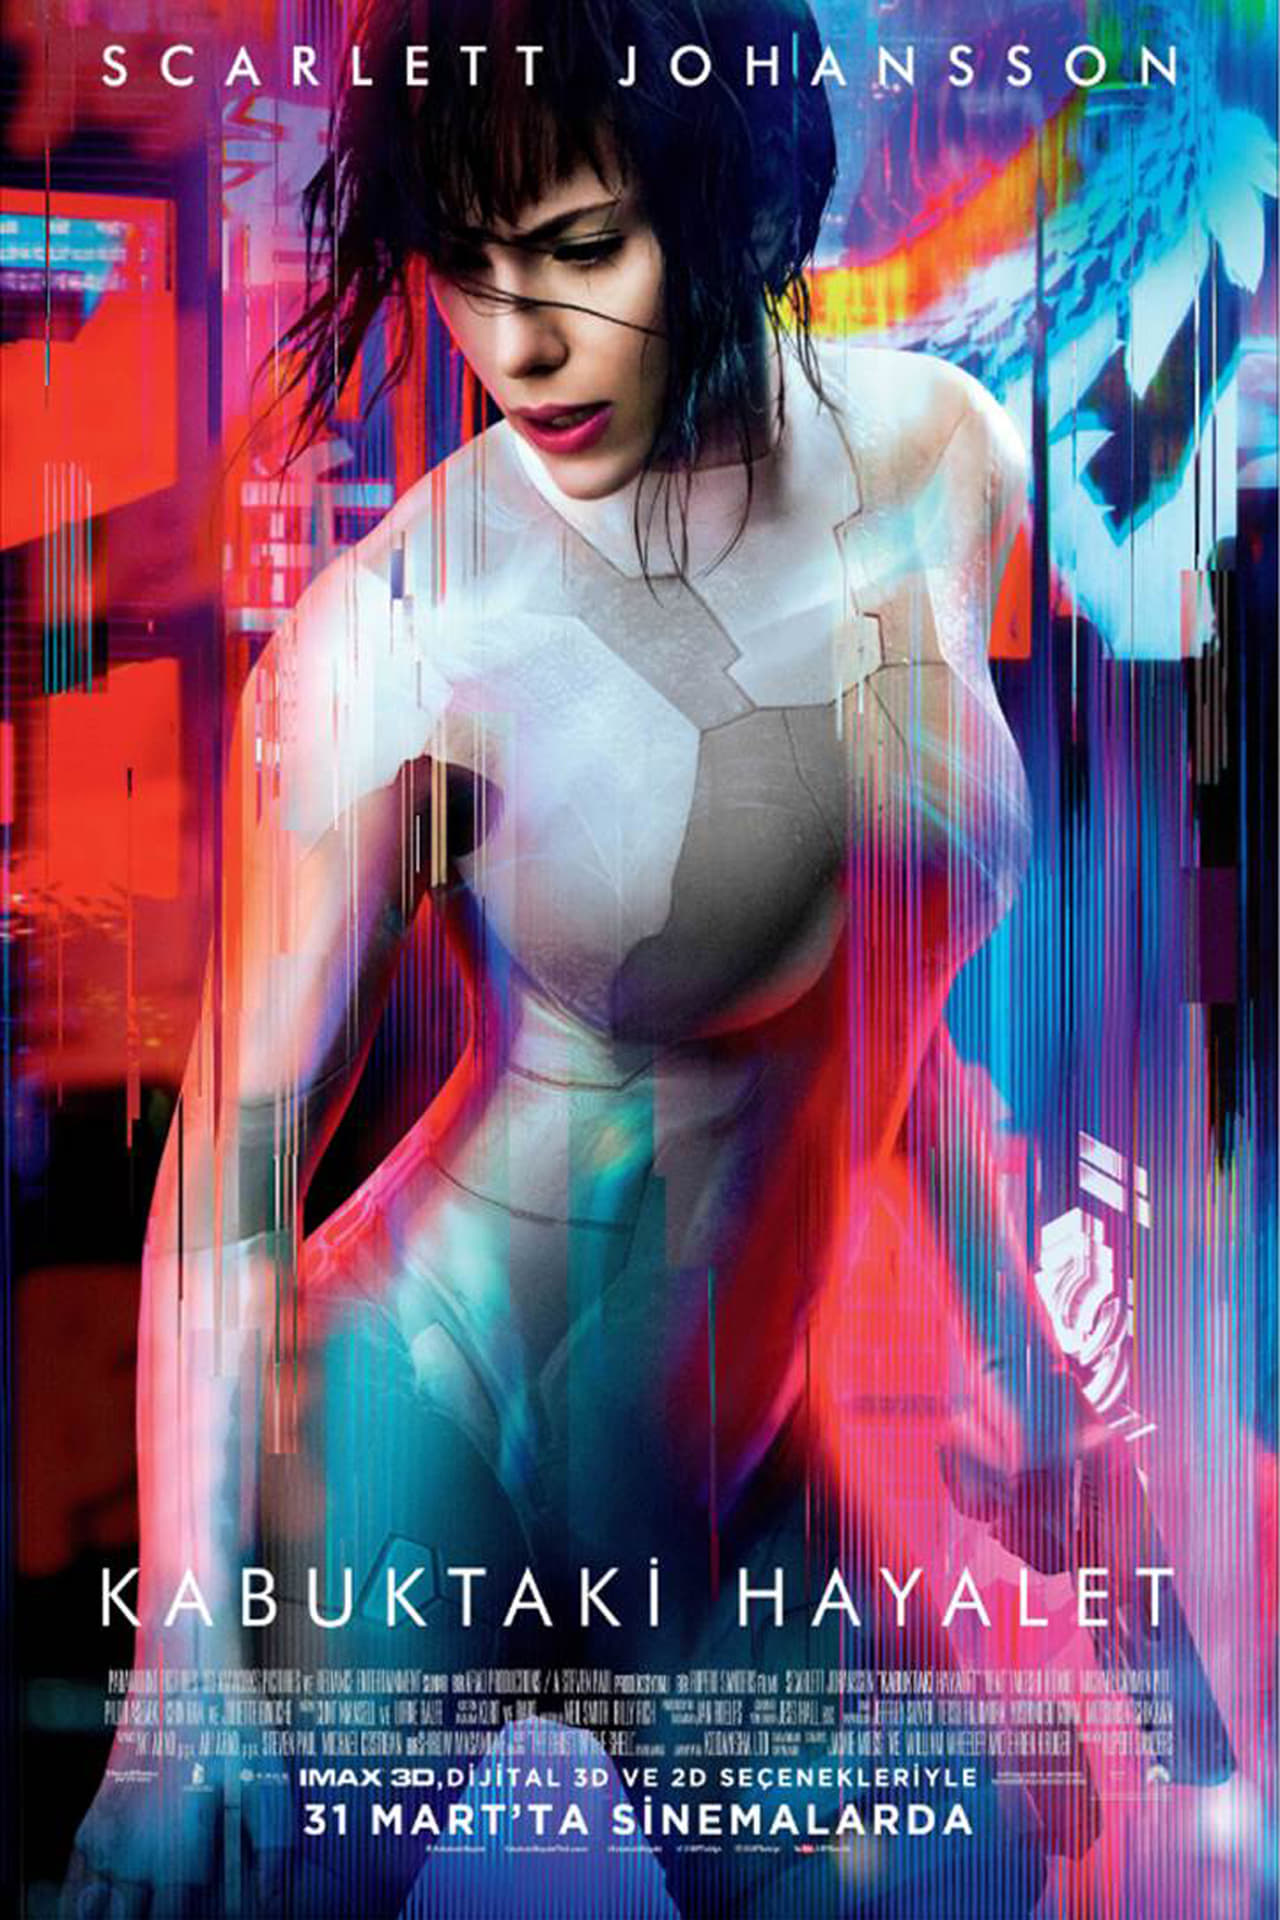 Ghost in the Shell (2017) 640Kbps 23.976Fps 48Khz 5.1Ch BluRay Turkish Audio TAC